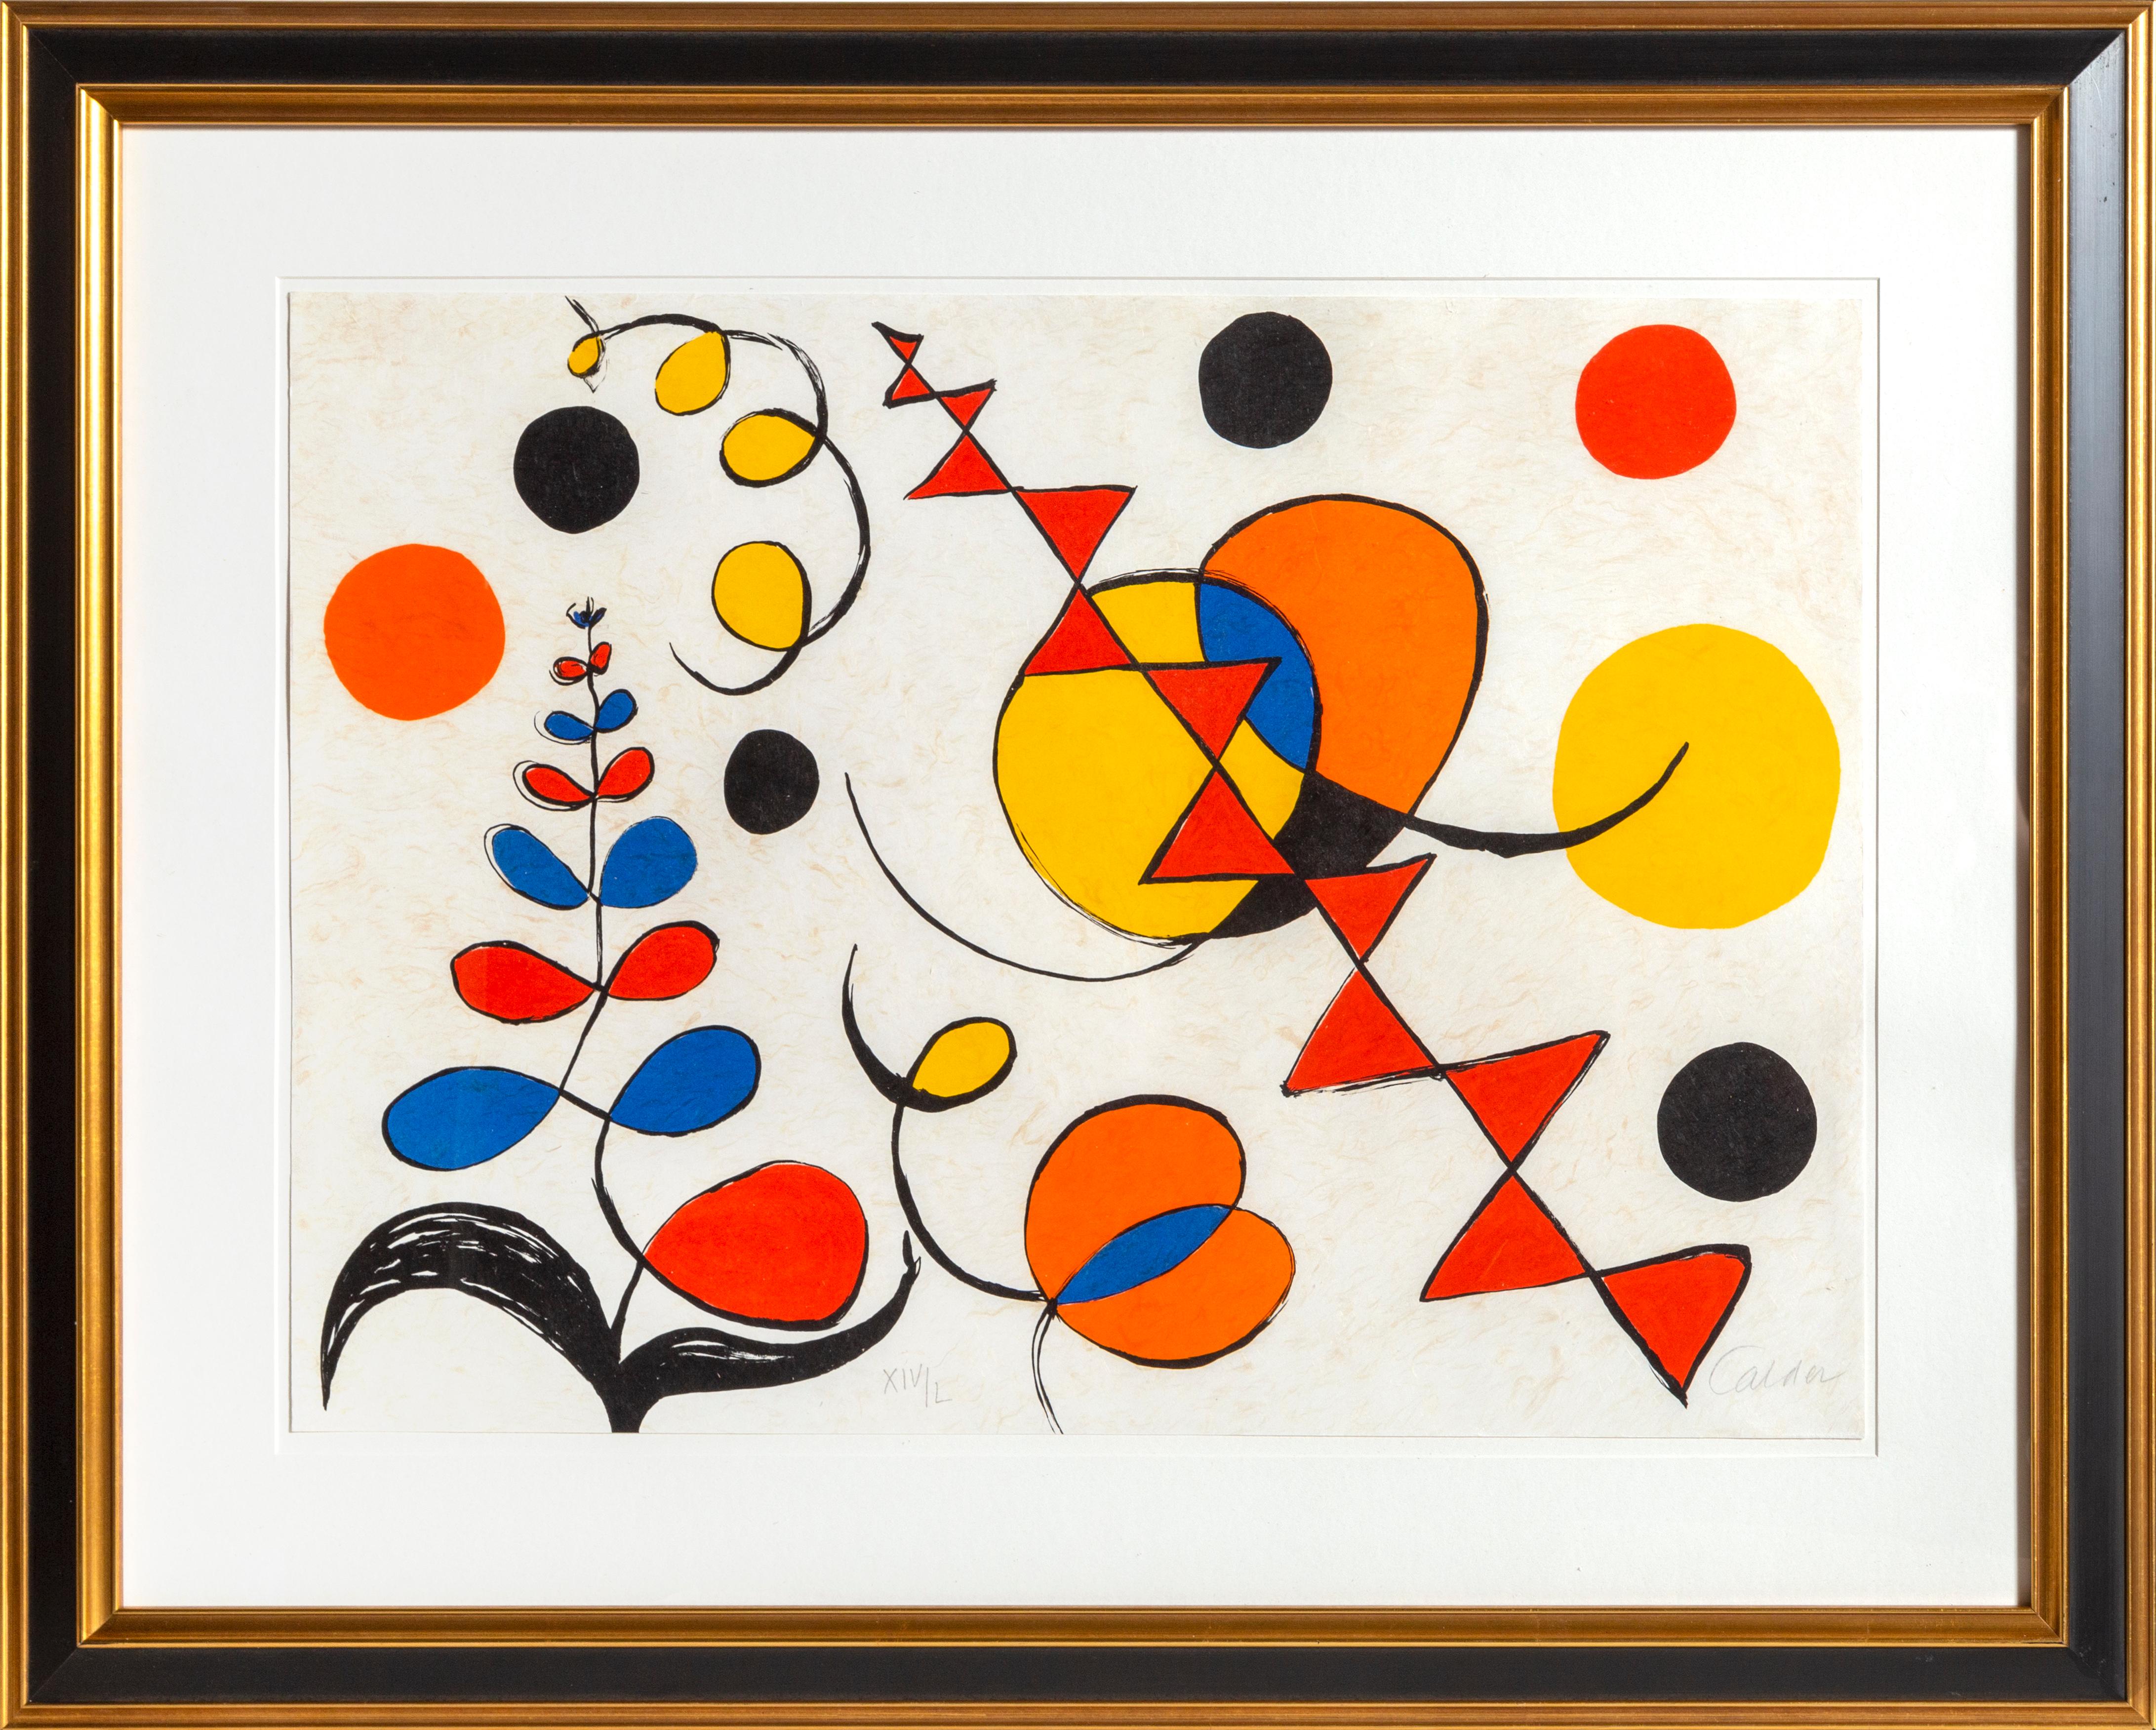 Artist: Alexander Calder, American (1898 - 1976)
Title: untitled from La Memoire Elementaire
Year: 1975-76
Medium: Lithograph on Japon nacre, signed and numbered in pencil 
Edition: XIV/L
Size: 20.5 x 28.25 in. (52.07 x 71.76 cm)
Frame Size: 30.5 x